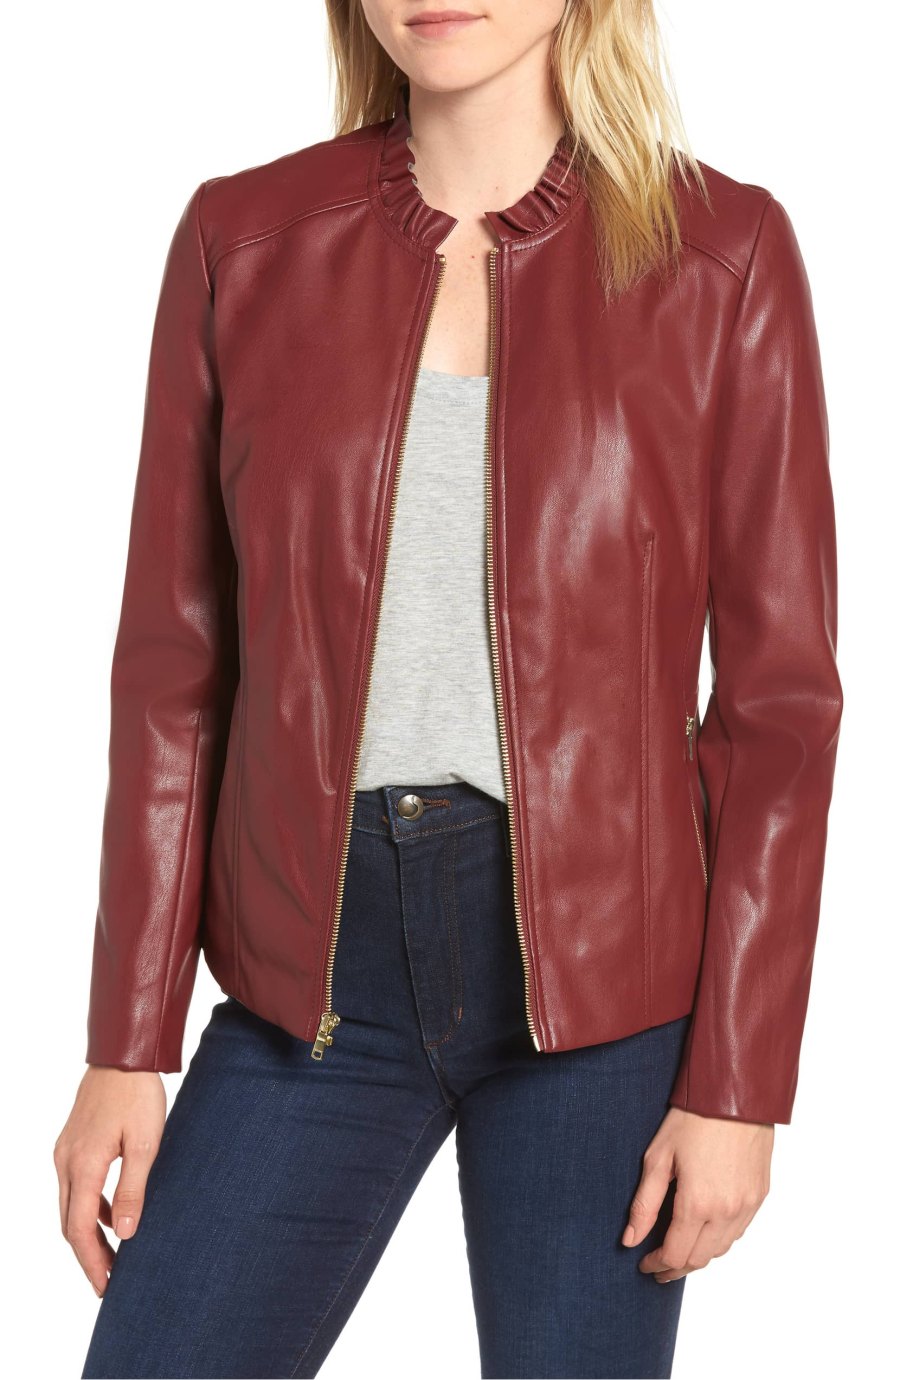 Shop This Ruby Faux Leather Jacket on Sale at Nordstrom